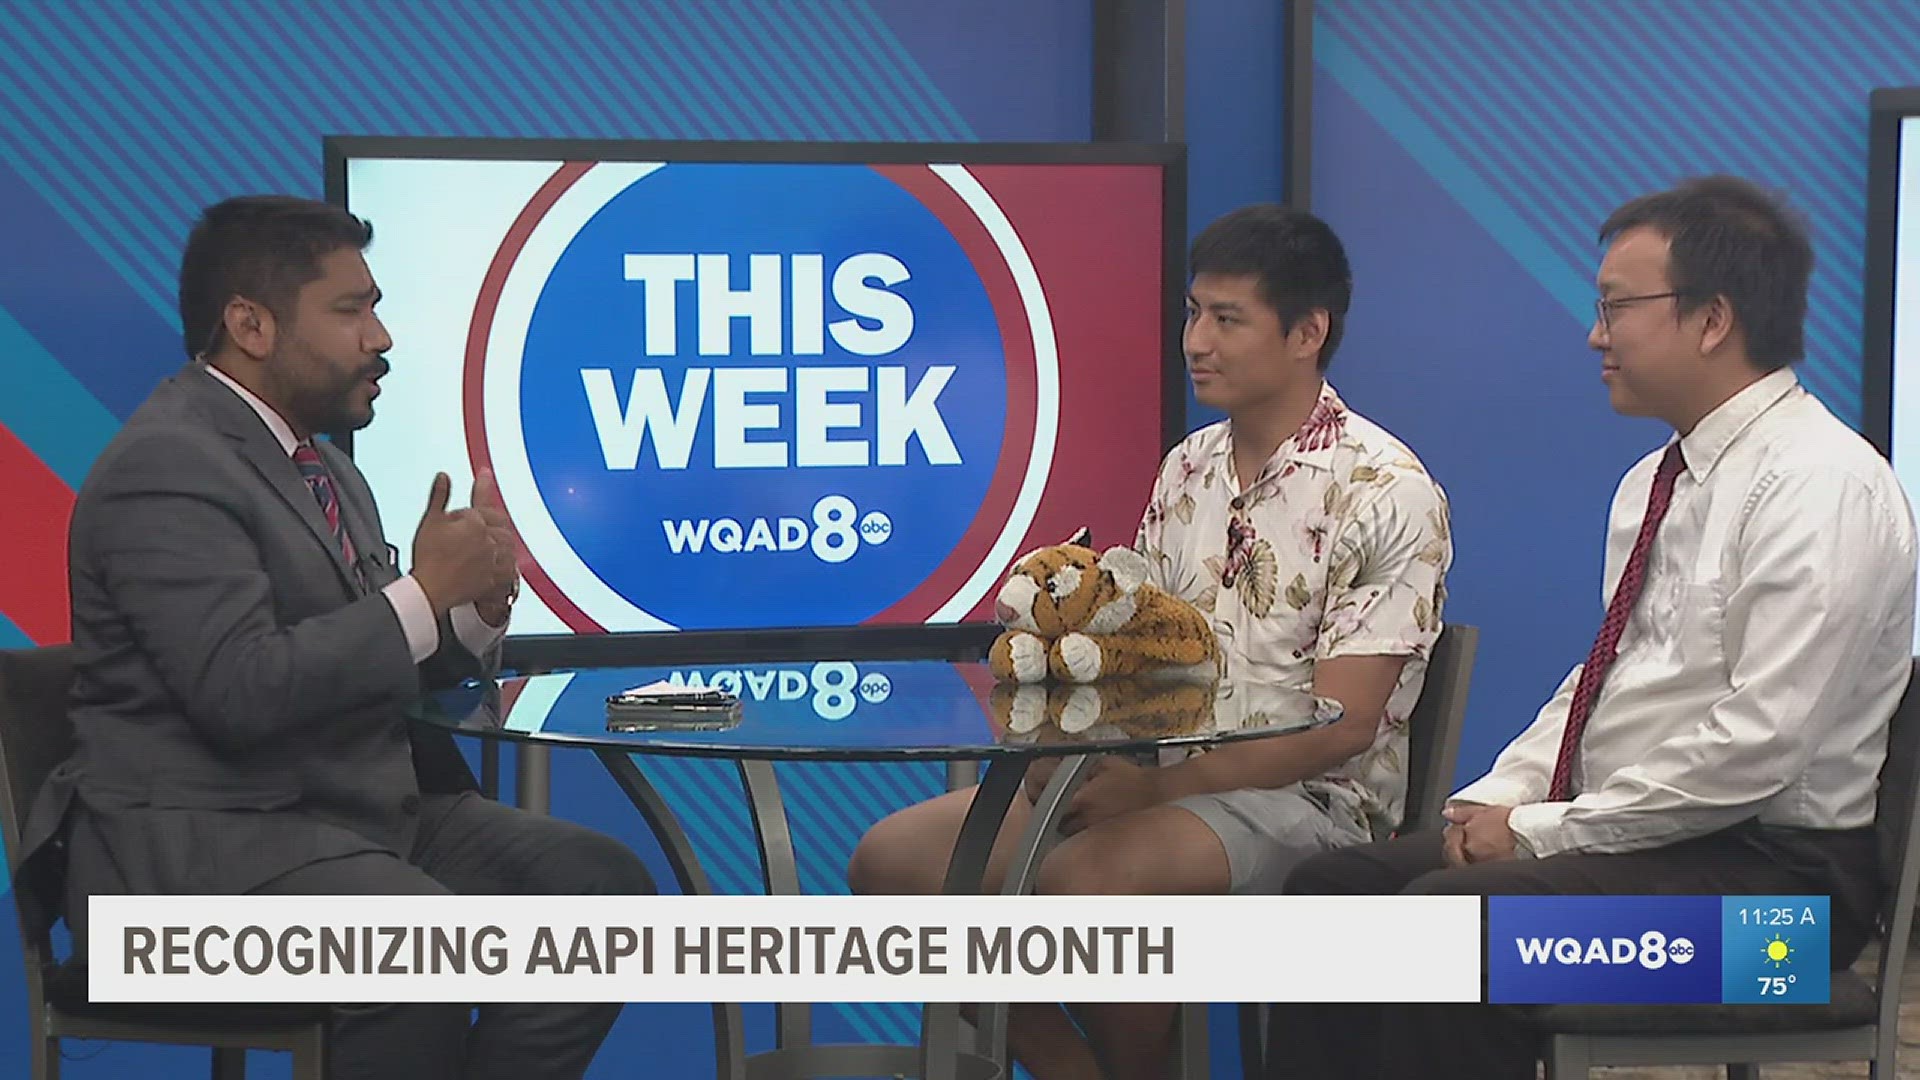 News 8's own Multi-Skilled Journalists reflect on what Asian American and Pacific Islander Heritage Month means to them.